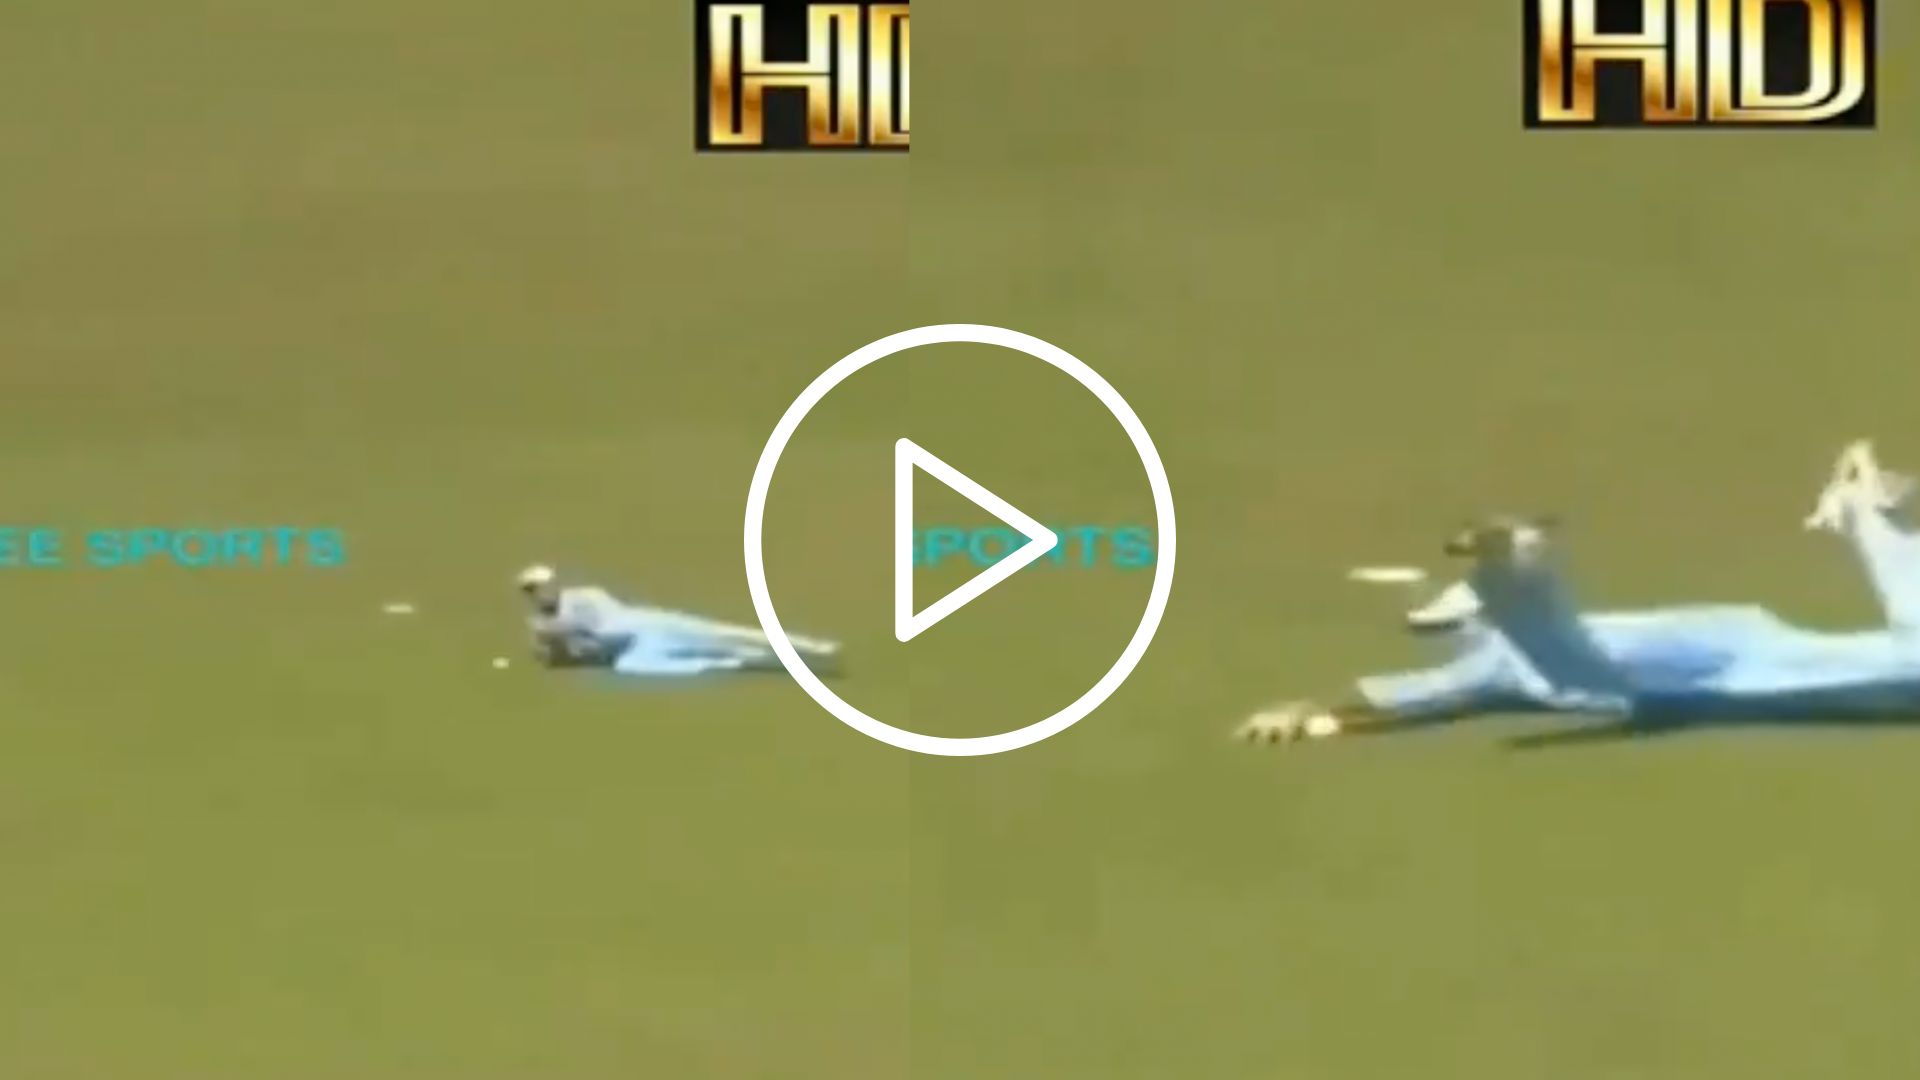 [Watch] When Ravindra Jadeja Dropped A Sitter On His Debut